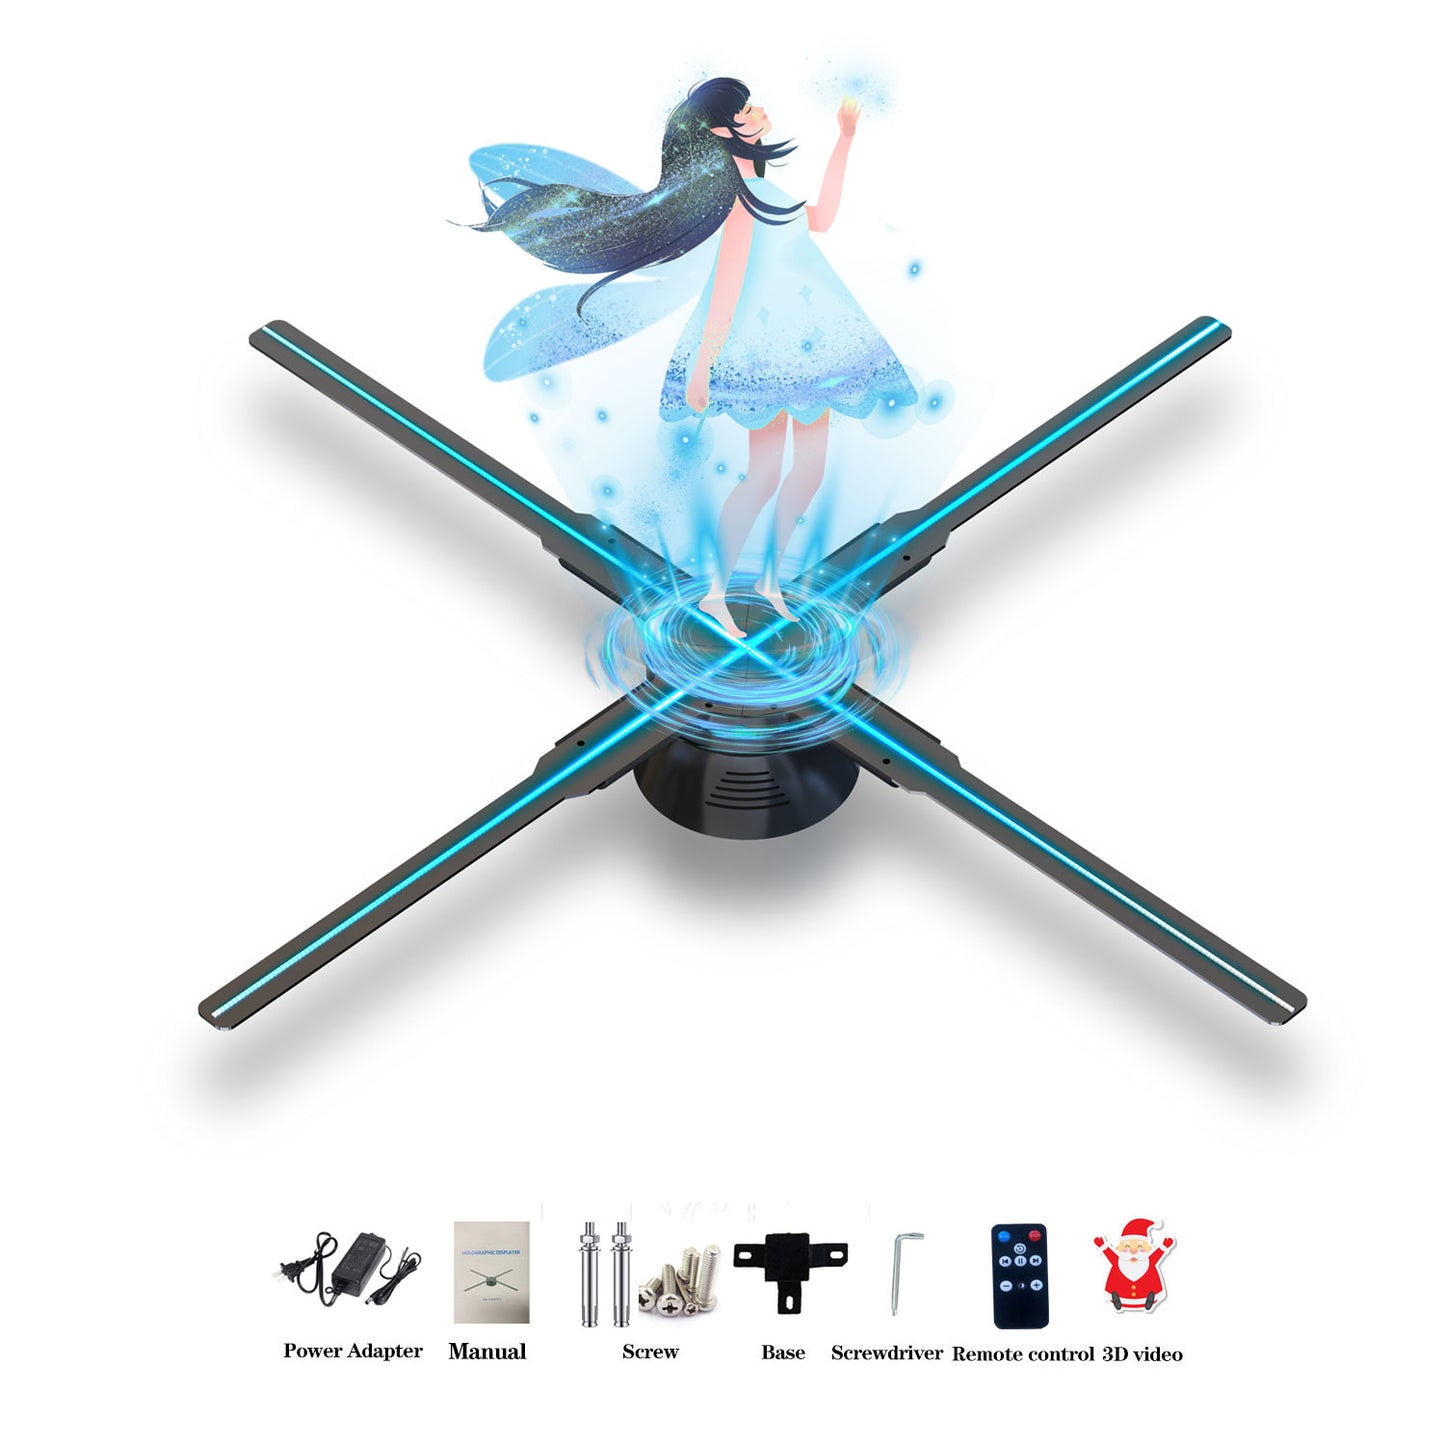 3D Hologram Fan Display with WiFi, Four-Axil Spinning, and High Transfer Speed, Upload by iPhone or Android，39.4 inch 3D Holographic Fan Projector for Shop, Bar